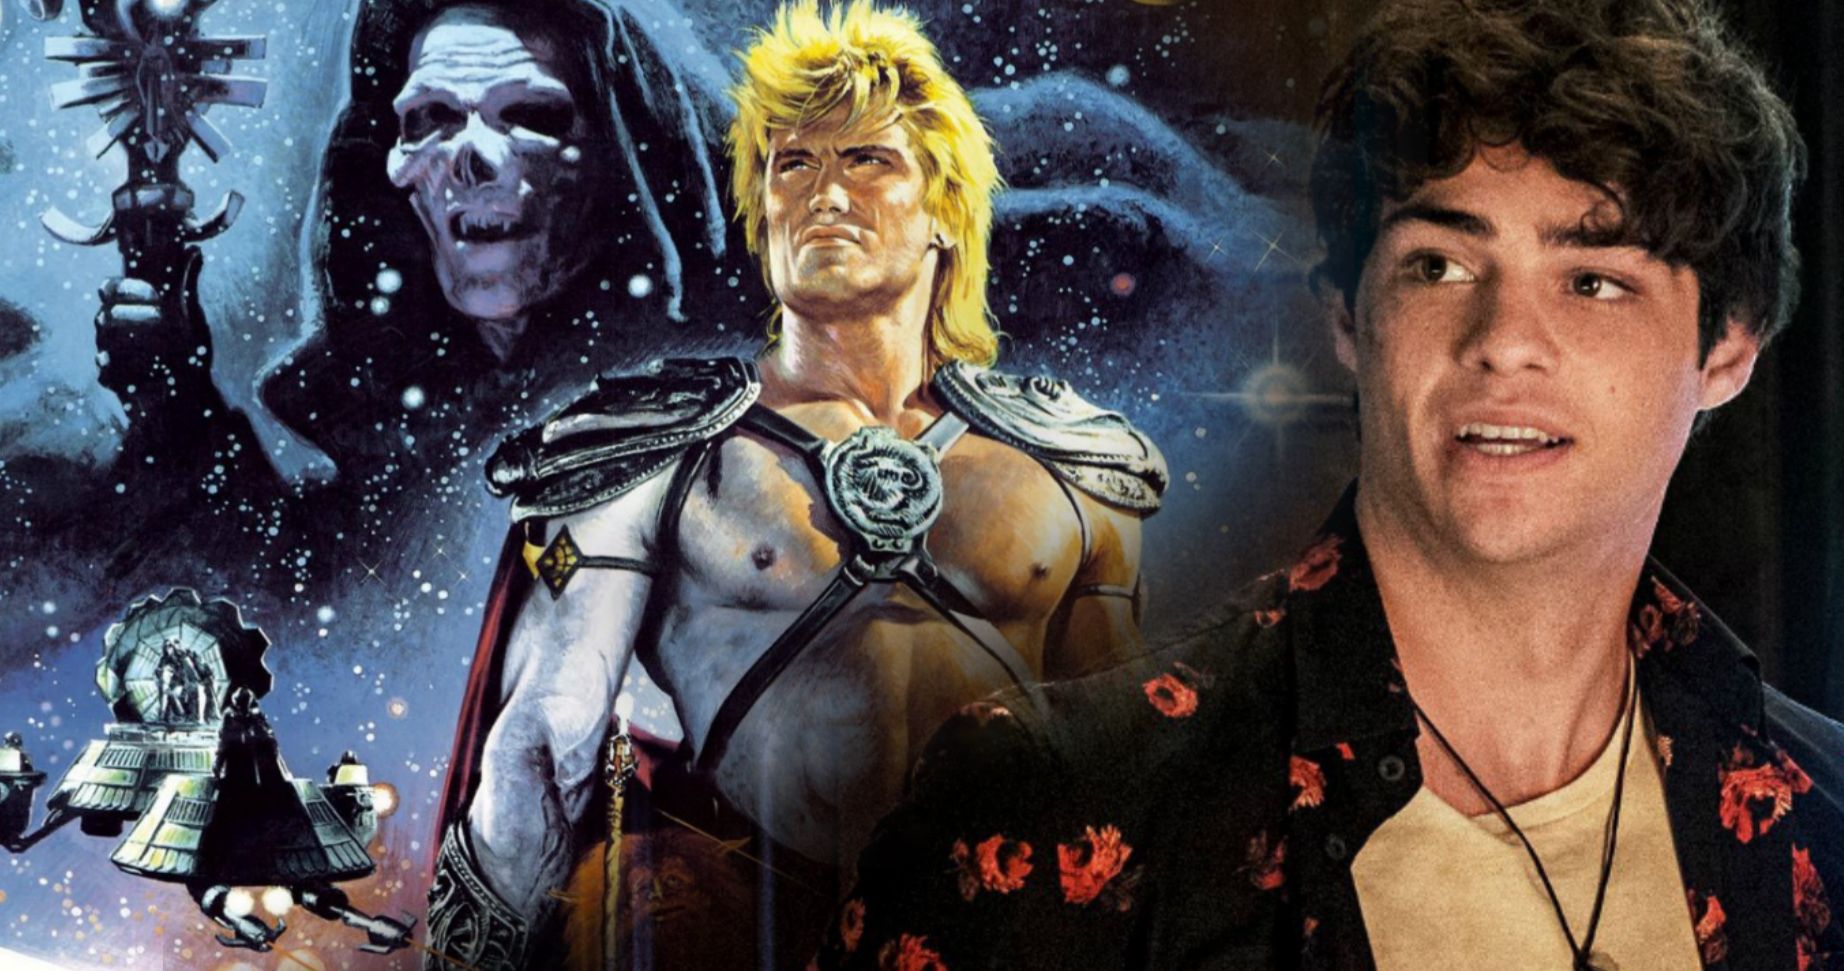 Masters of the Universe Shoots This Summer According to He-Man Actor Noah Centineo